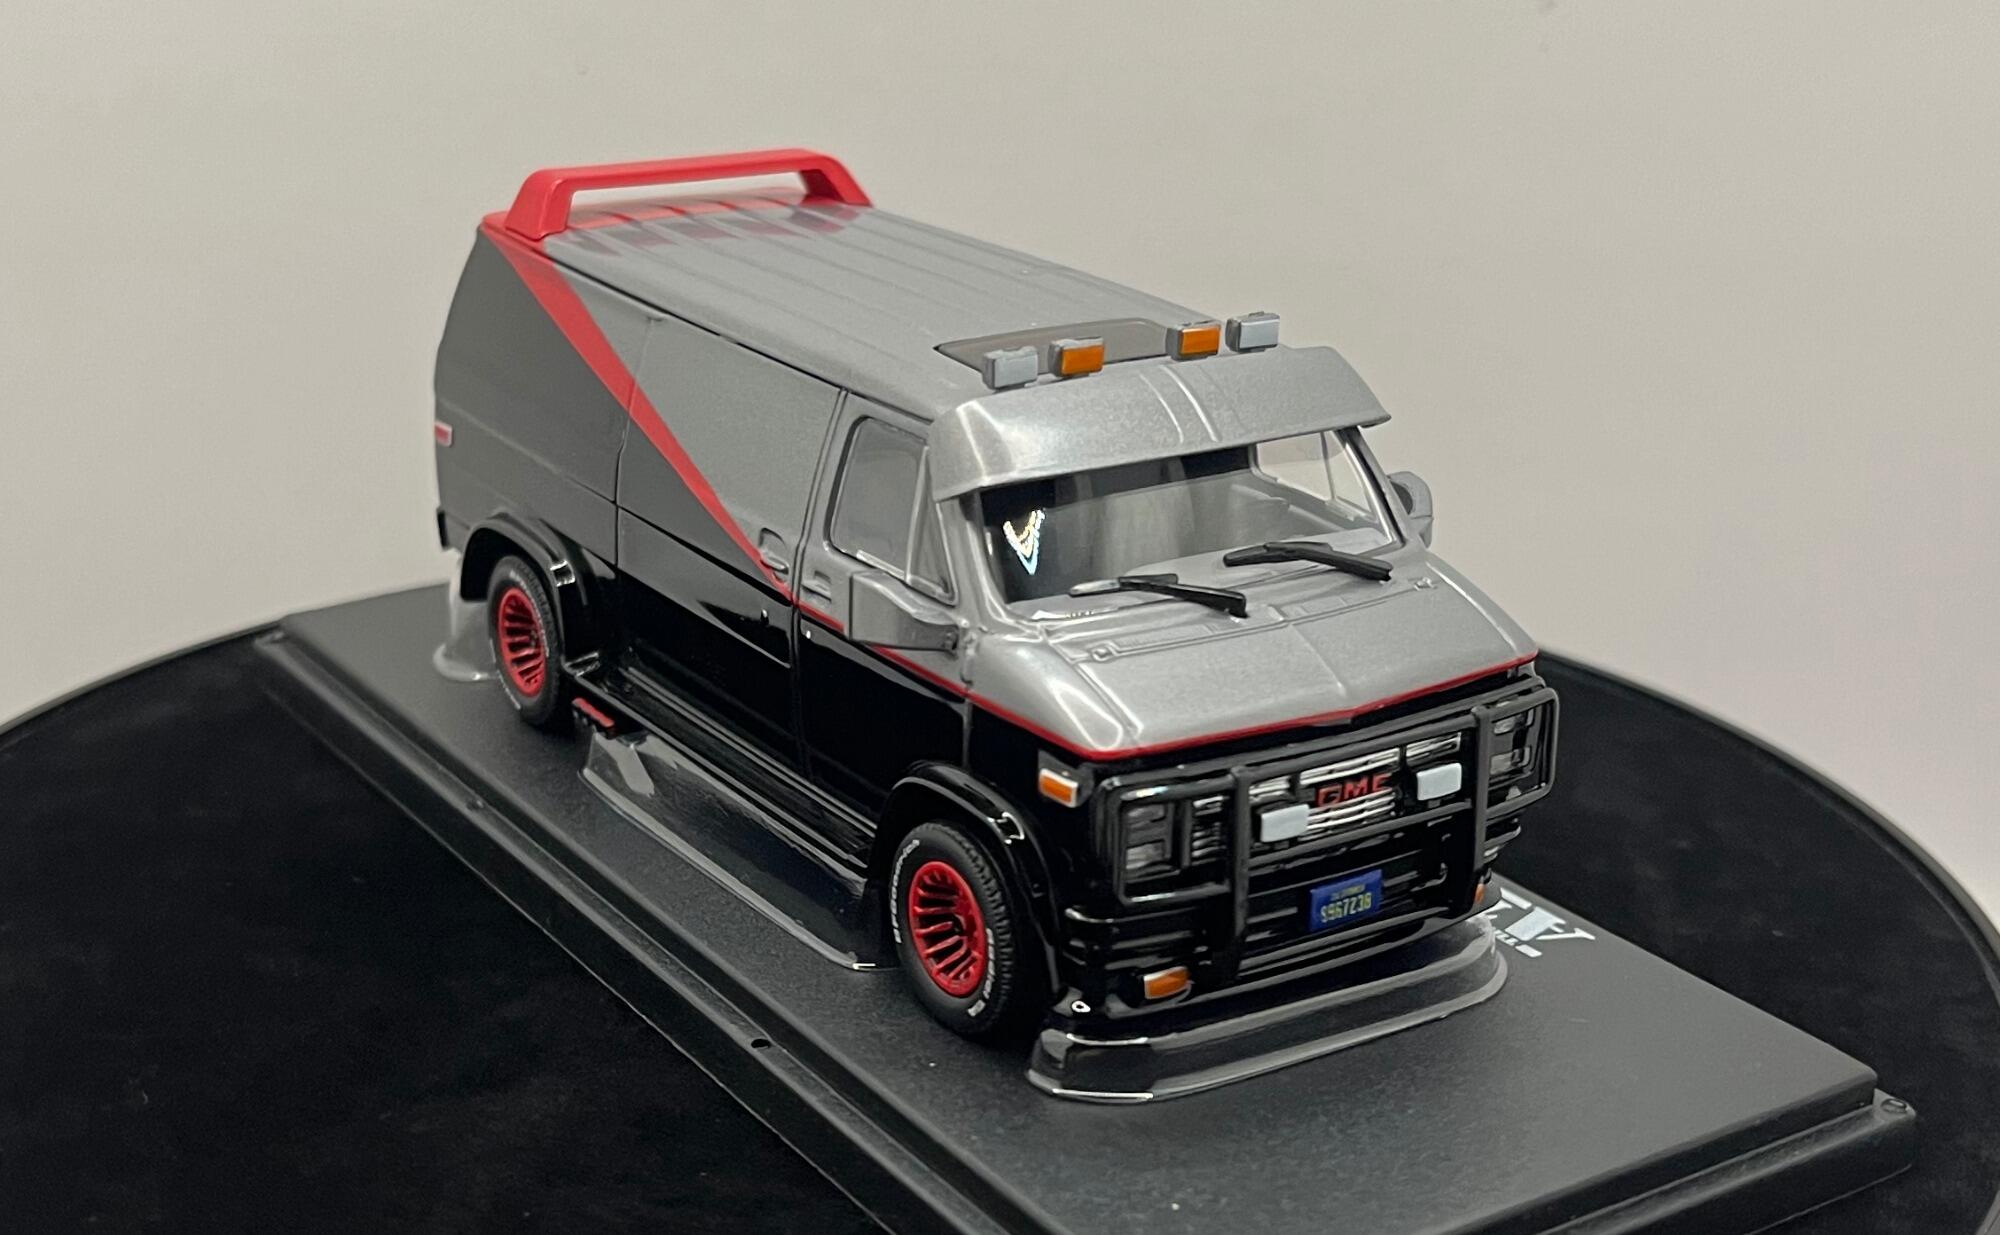 From the 1983-87 TV Series "The A Team" the 1983 GMC Vandura